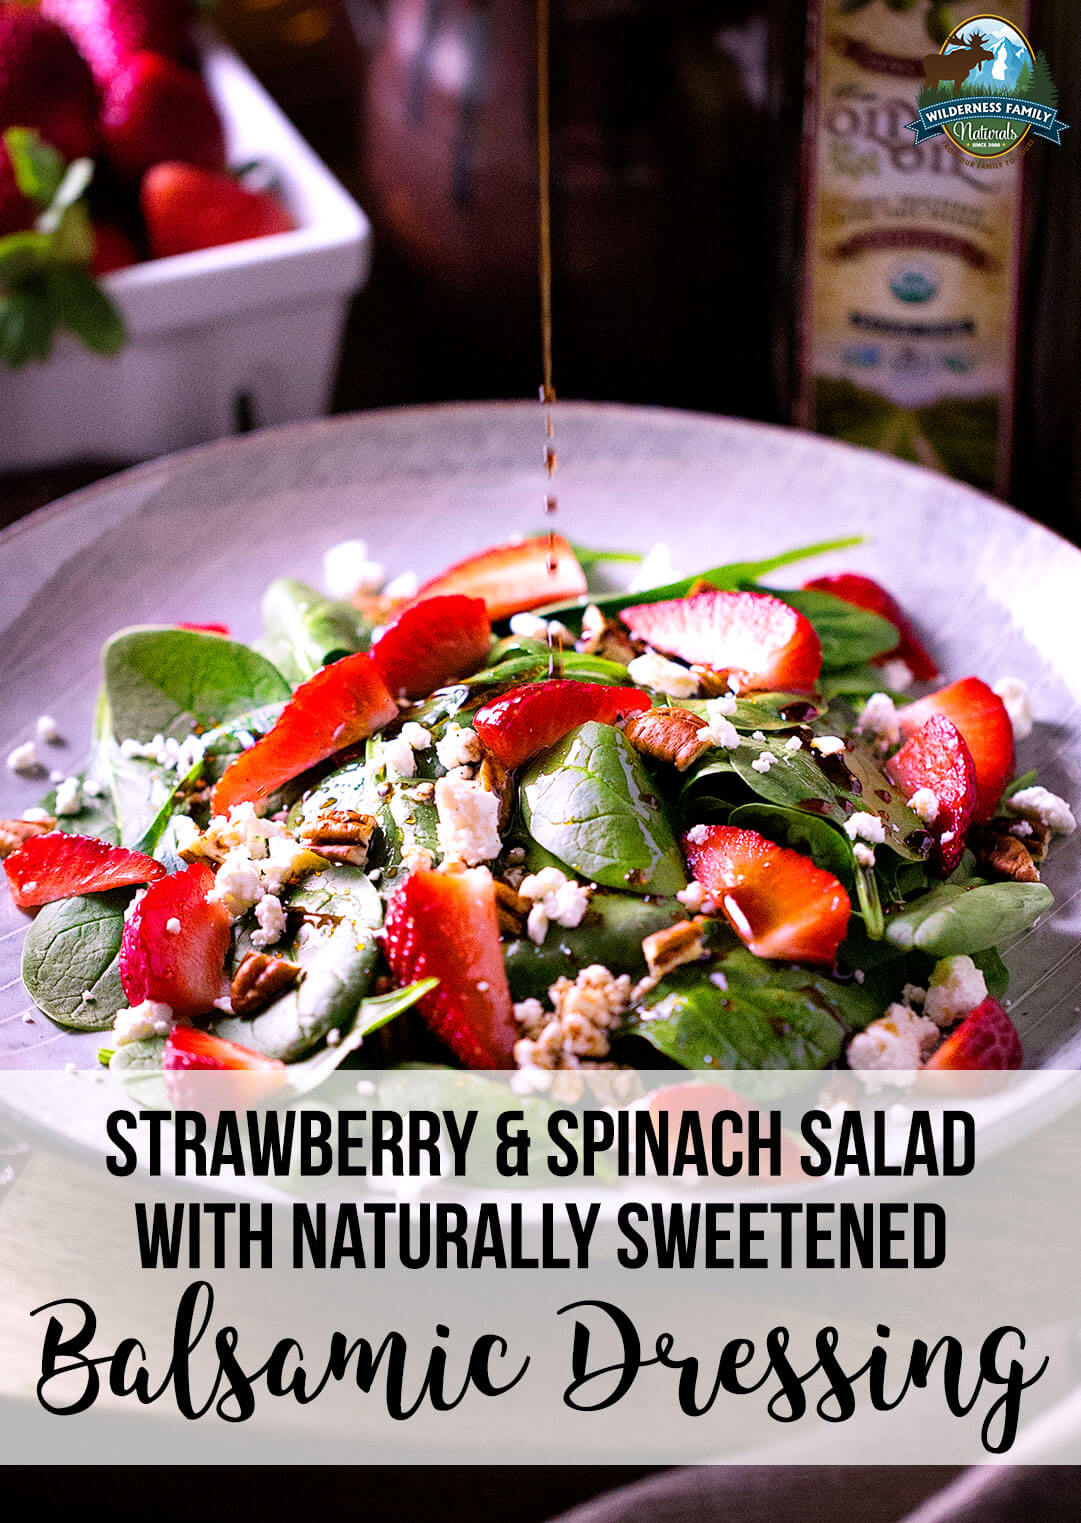 Strawberry & Spinach Salad with Naturally Sweetened Balsamic Dressing